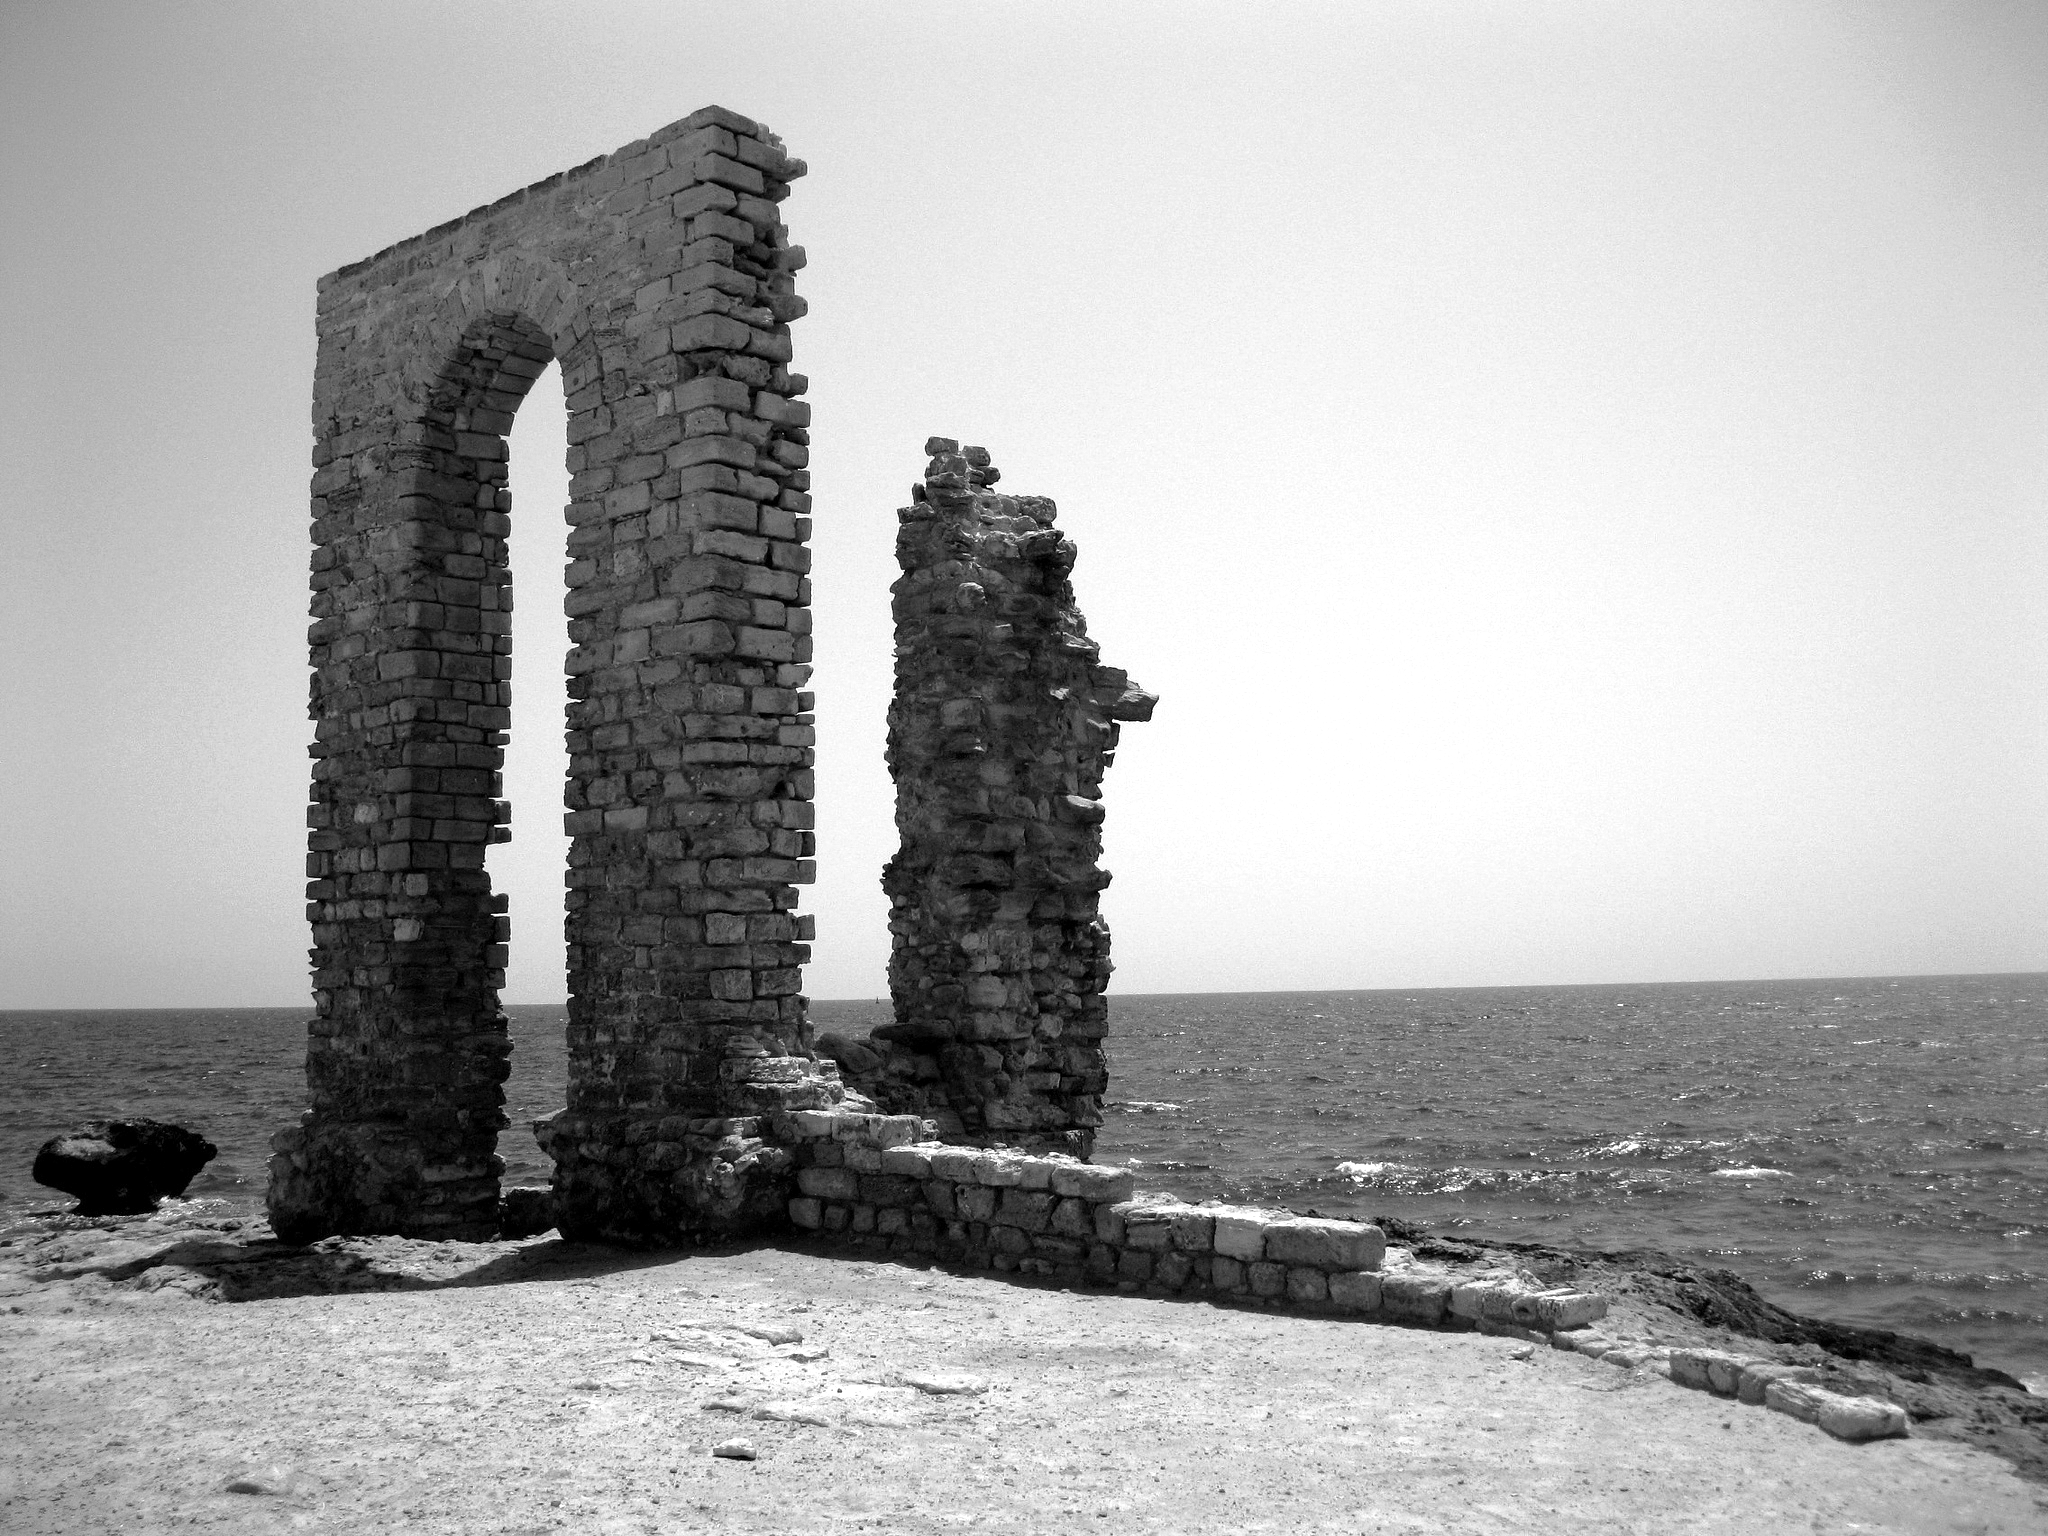 Figure 6: The same stone archway from figure 5 is seen from a different angle. It is less decrepit than in figure 5 because of its restoration by Tunisian authorities.